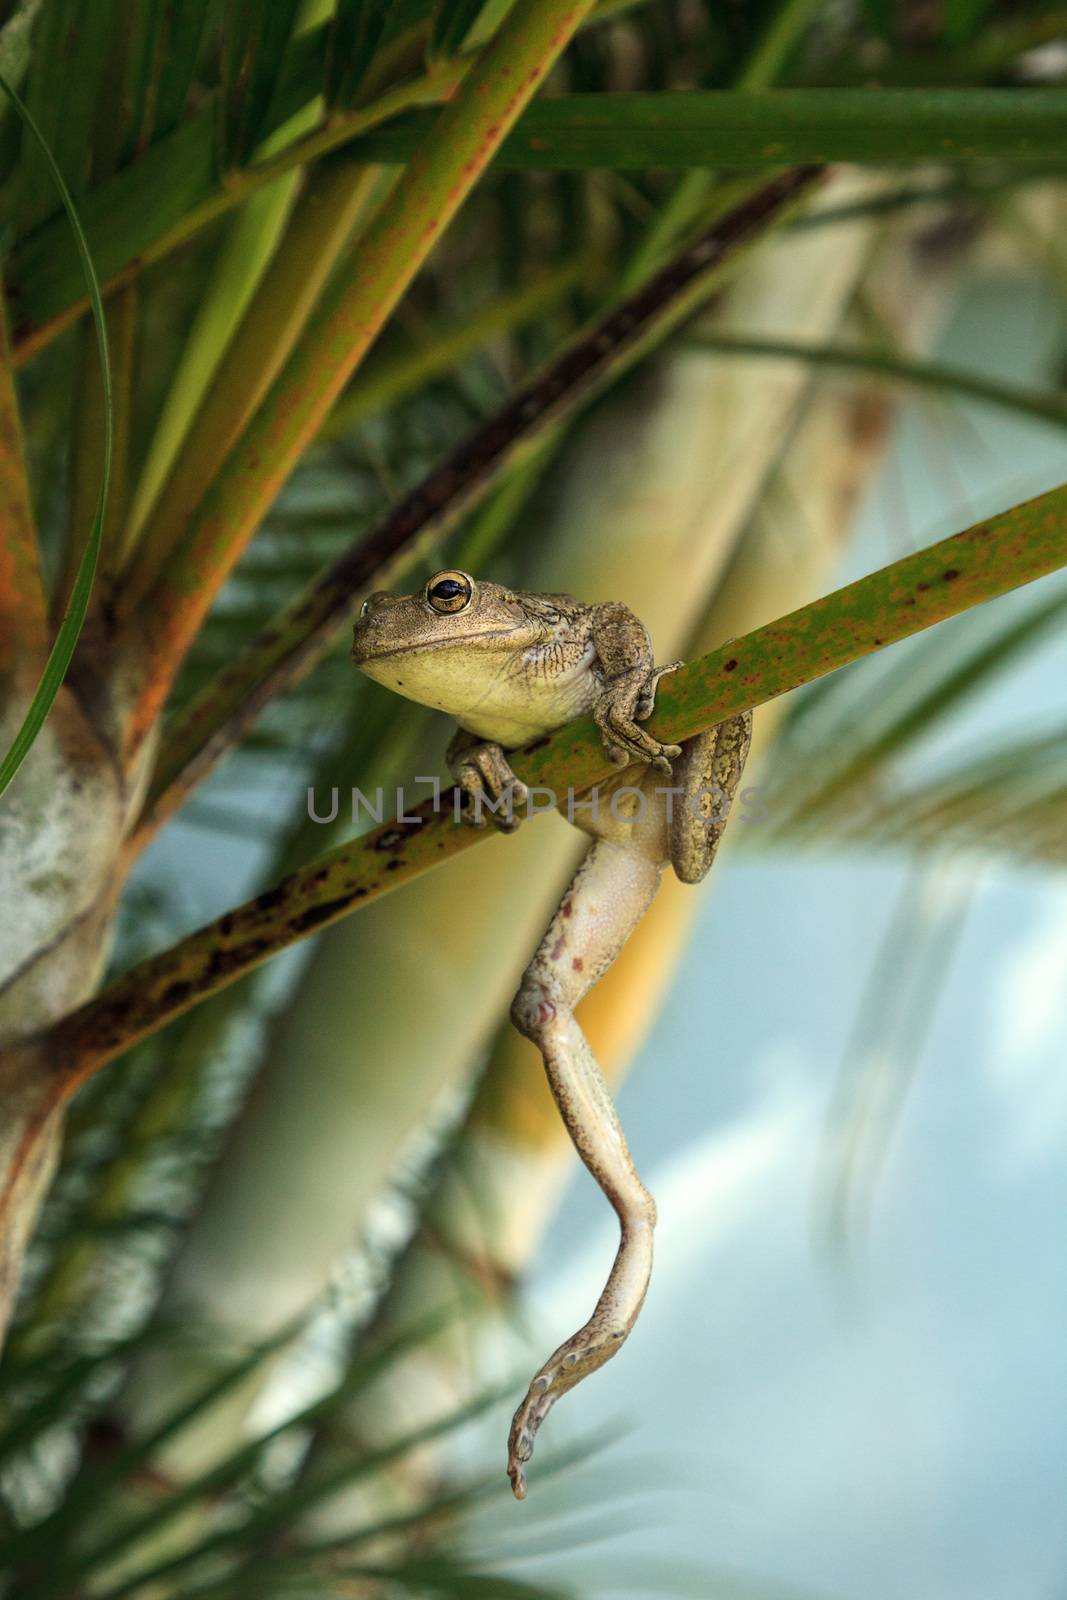 Cuban Tree Frog Osteopilus septentrionalis hangs on an areca palm in tropical Florida.